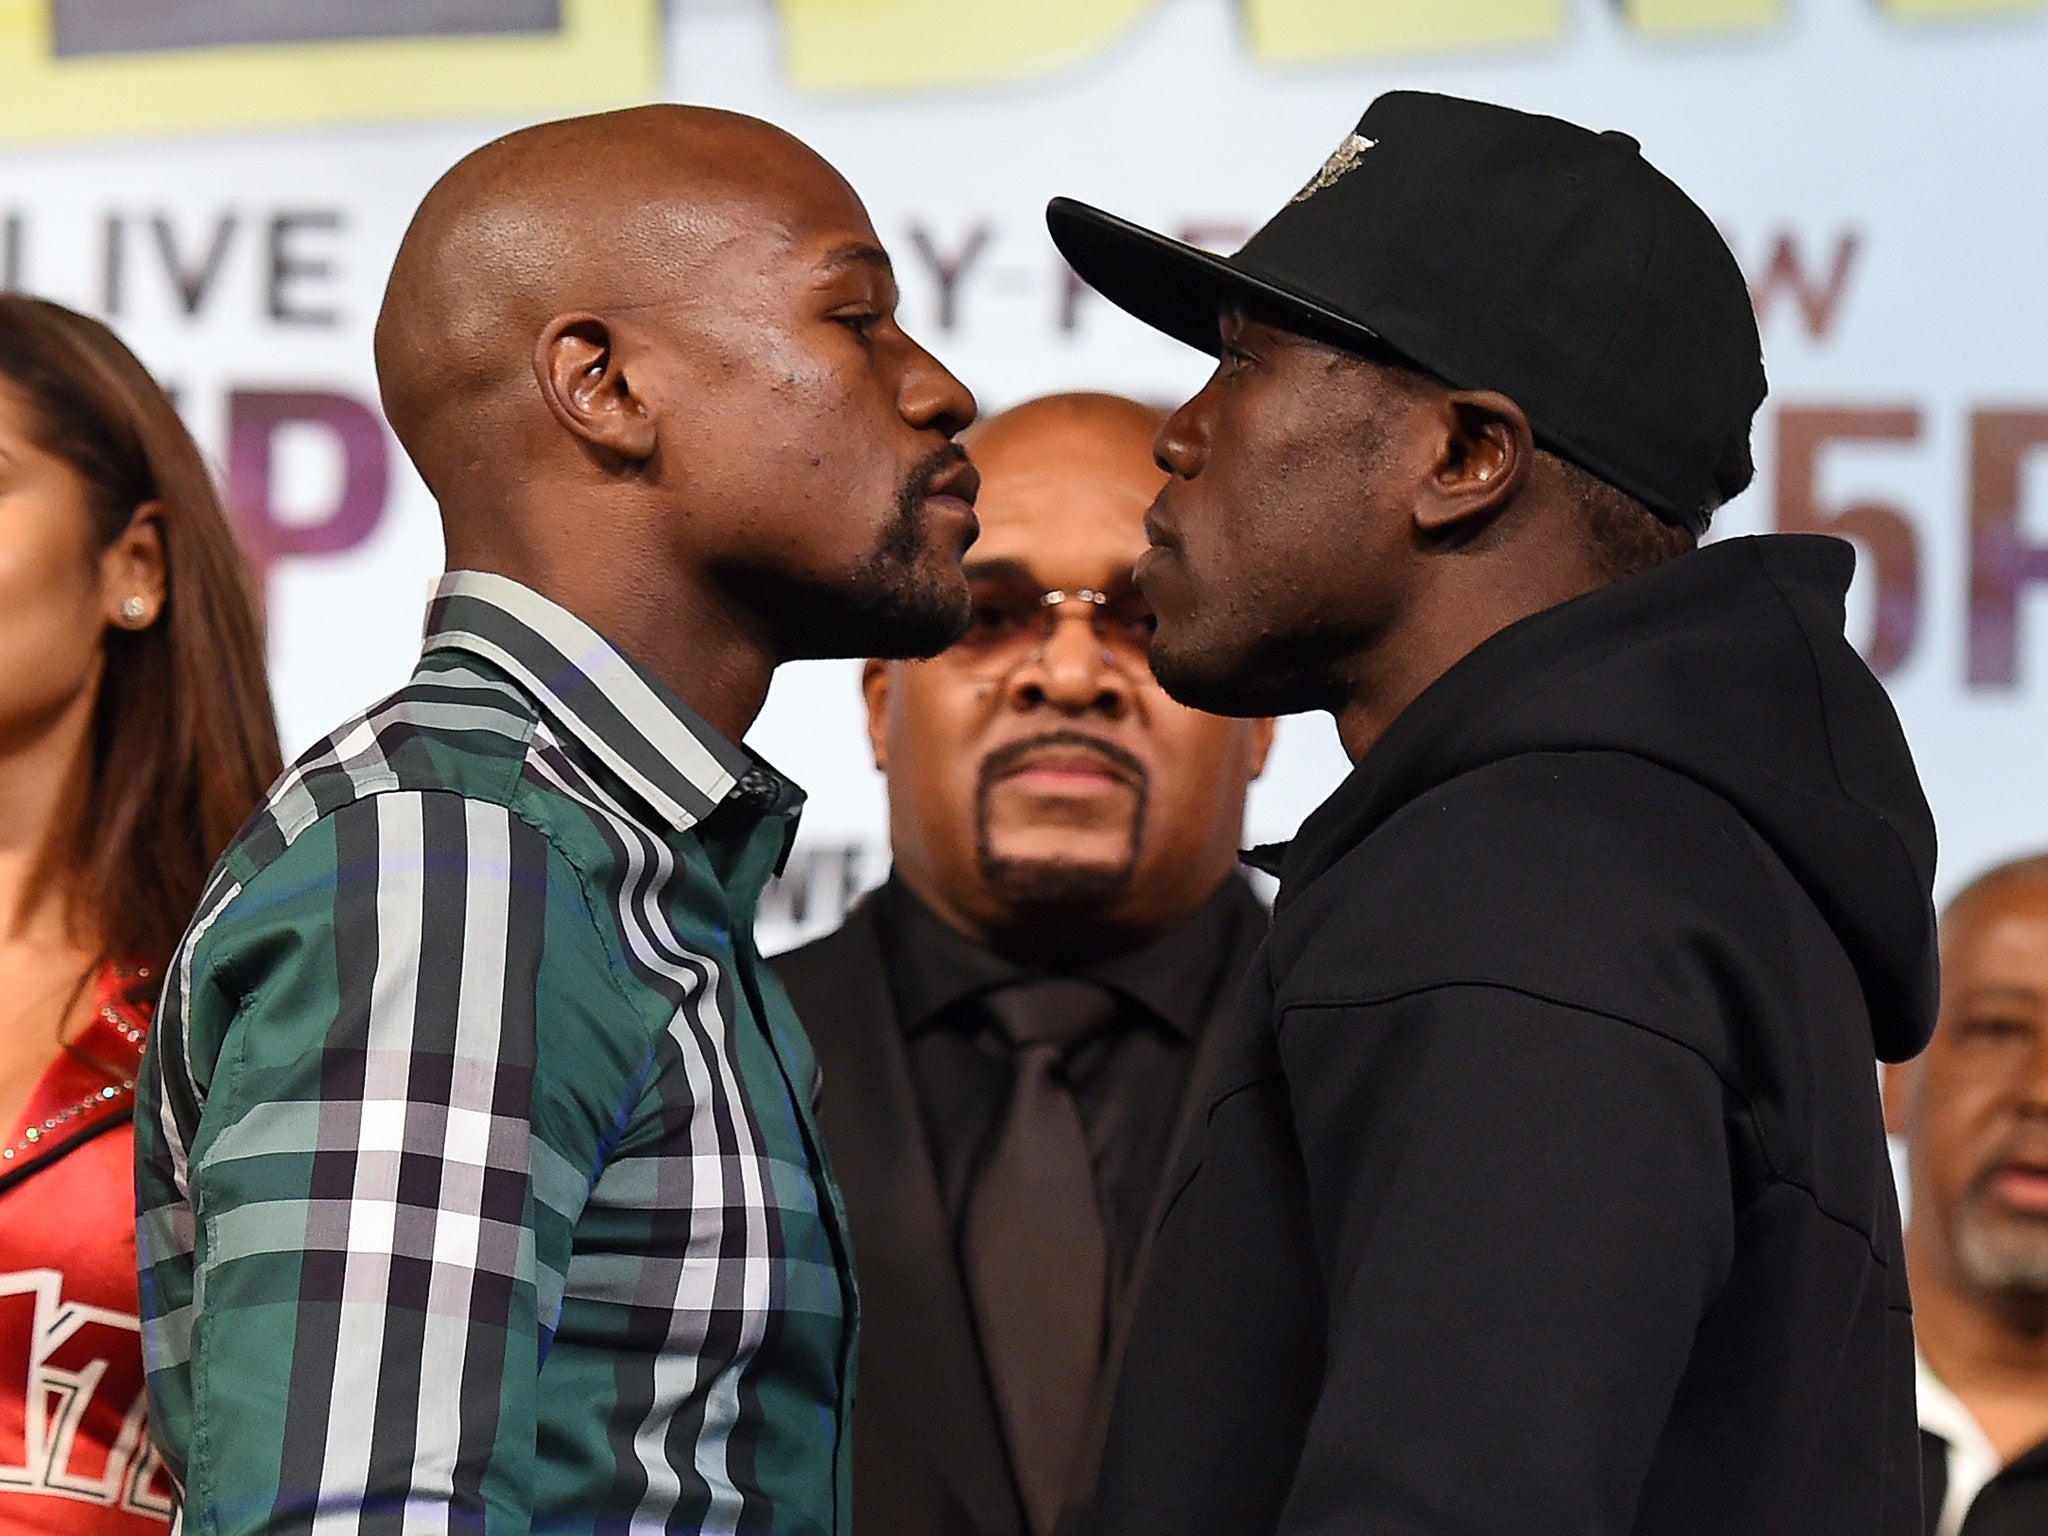 Berto was the last man to meet Mayweather in the ring